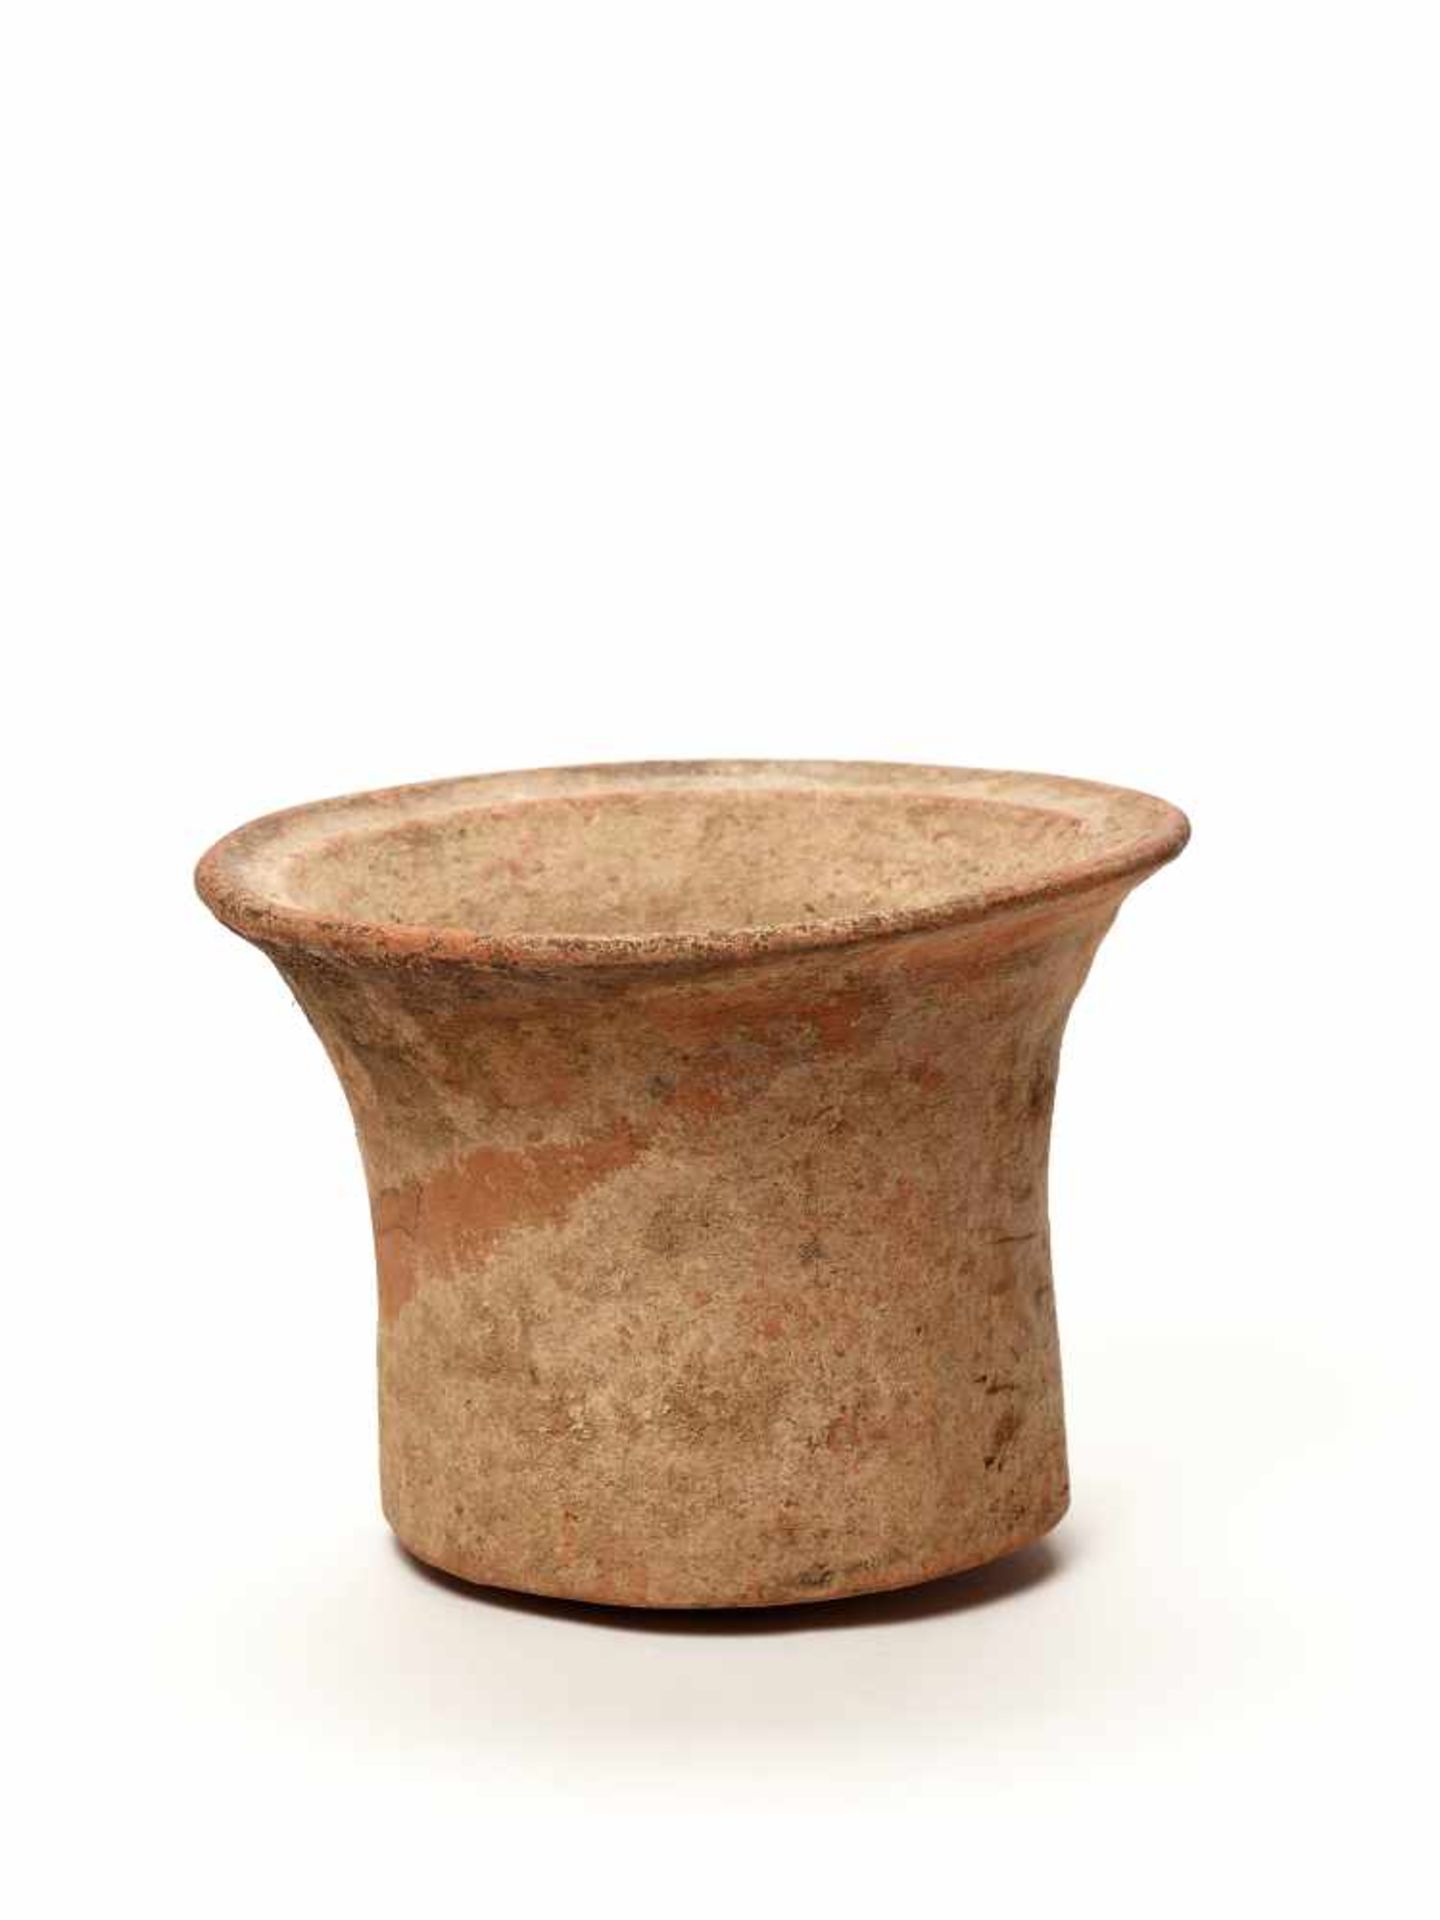 A BAN CHIANG TERRACOTTA VESSEL, 3000 BCThe sturdily potted vessel with a sprawling lip and a